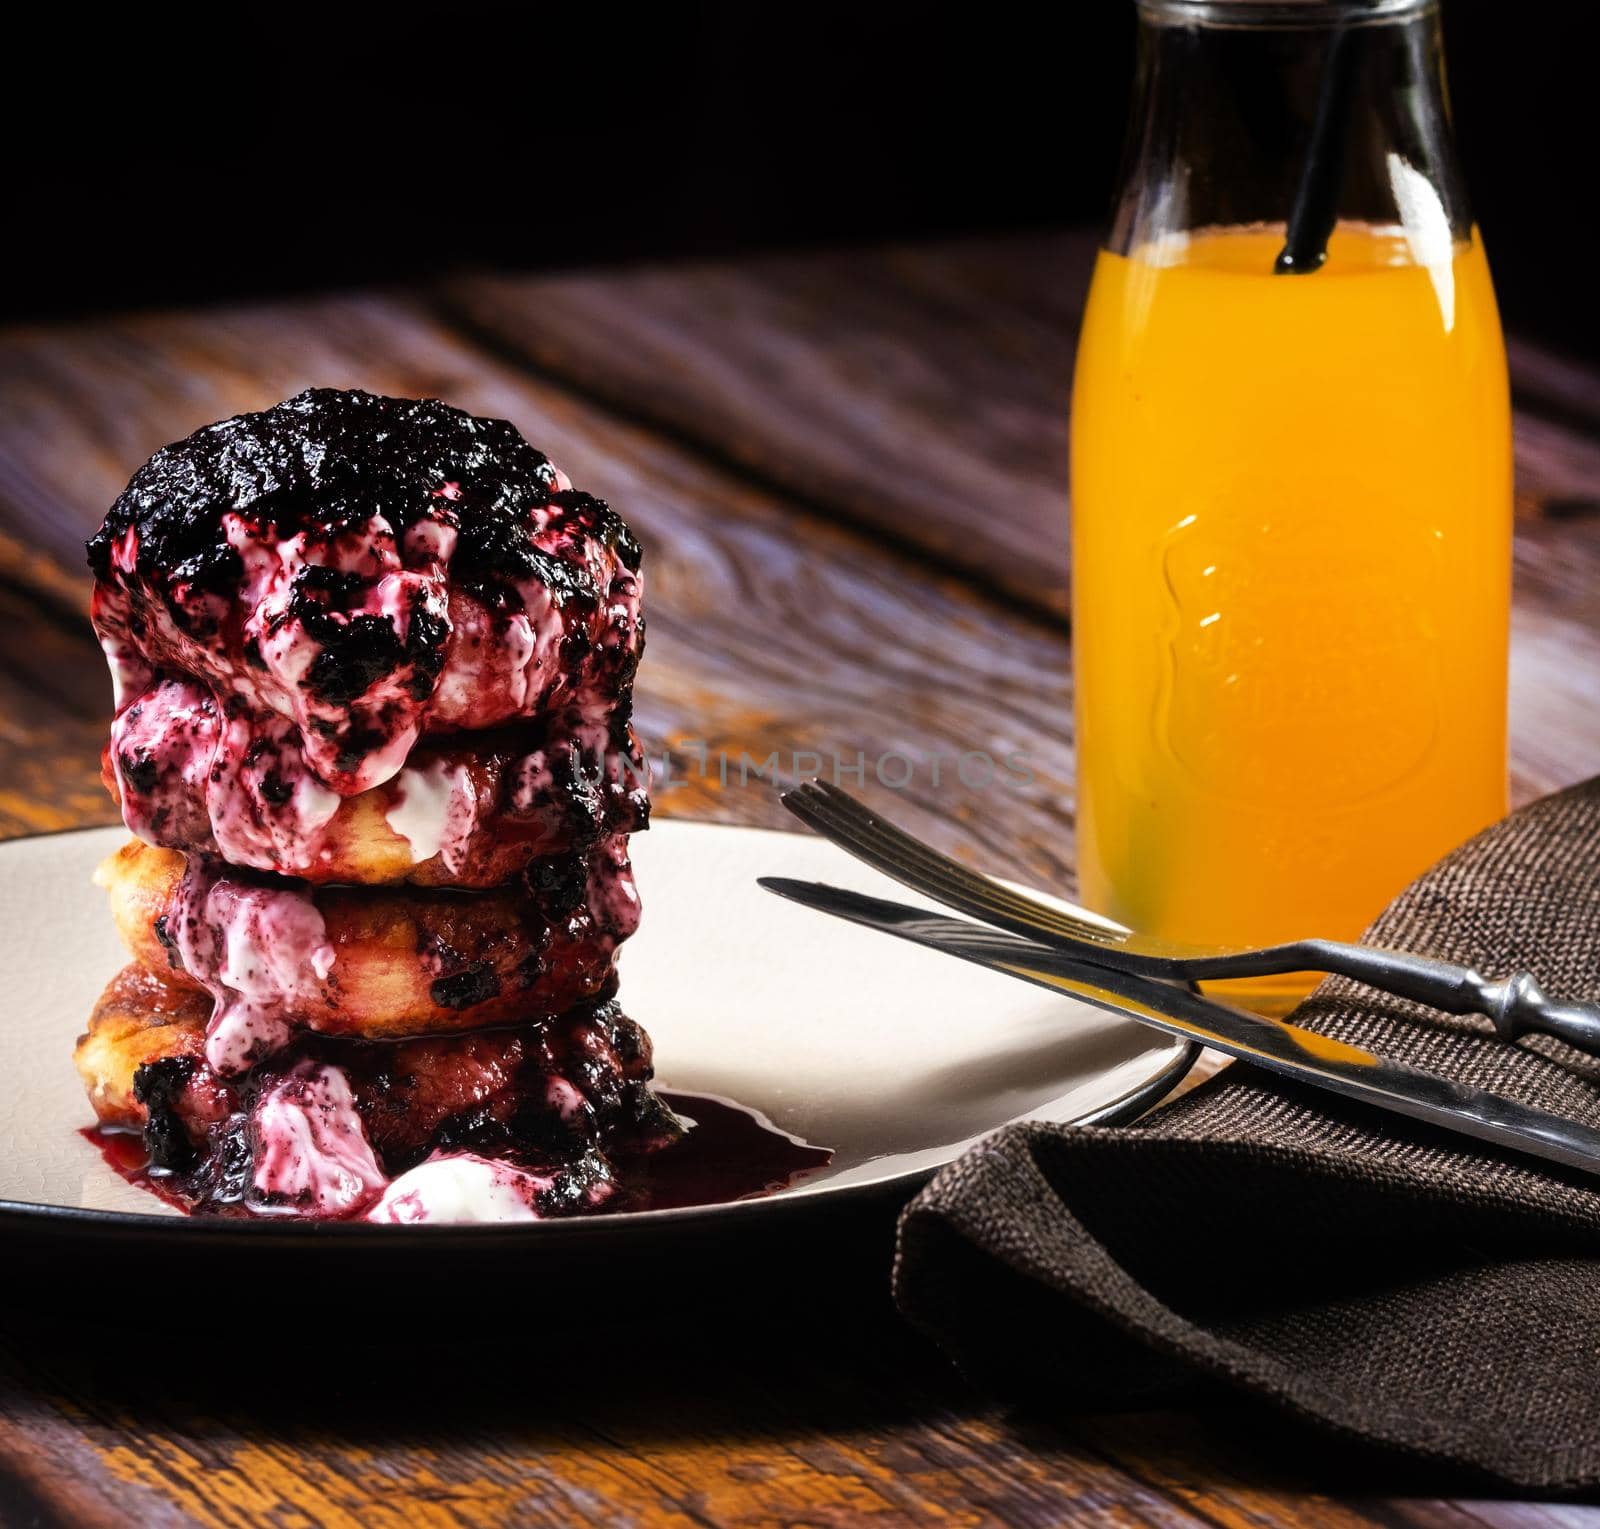 Fried Cheesecakes with blueberry jam and sour cream on a plate with orange juice in a bottle by Lobachad